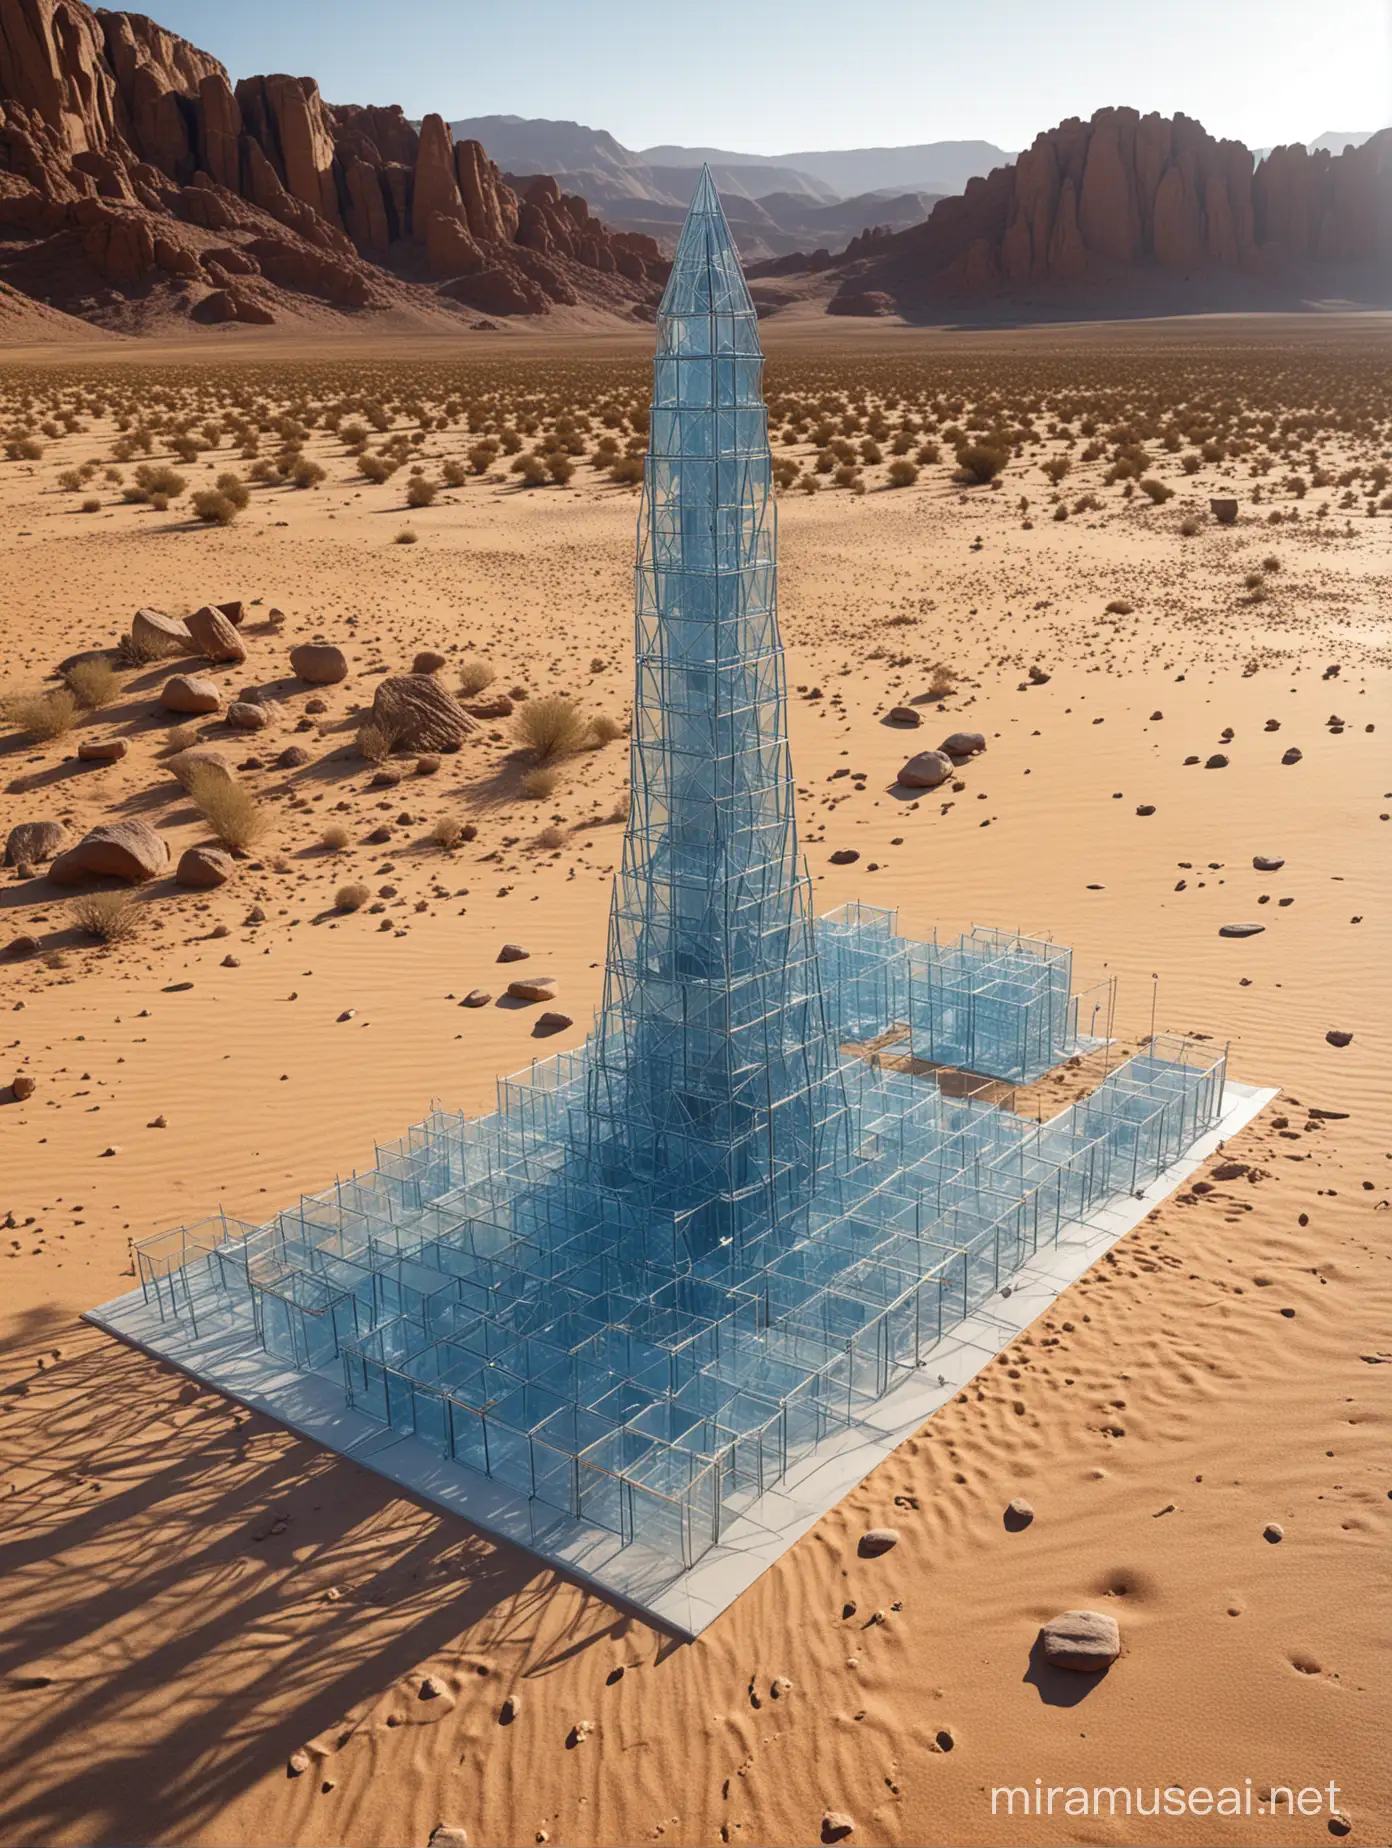 Majestic Desert Towers A Glimpse into Isolation and Vastness